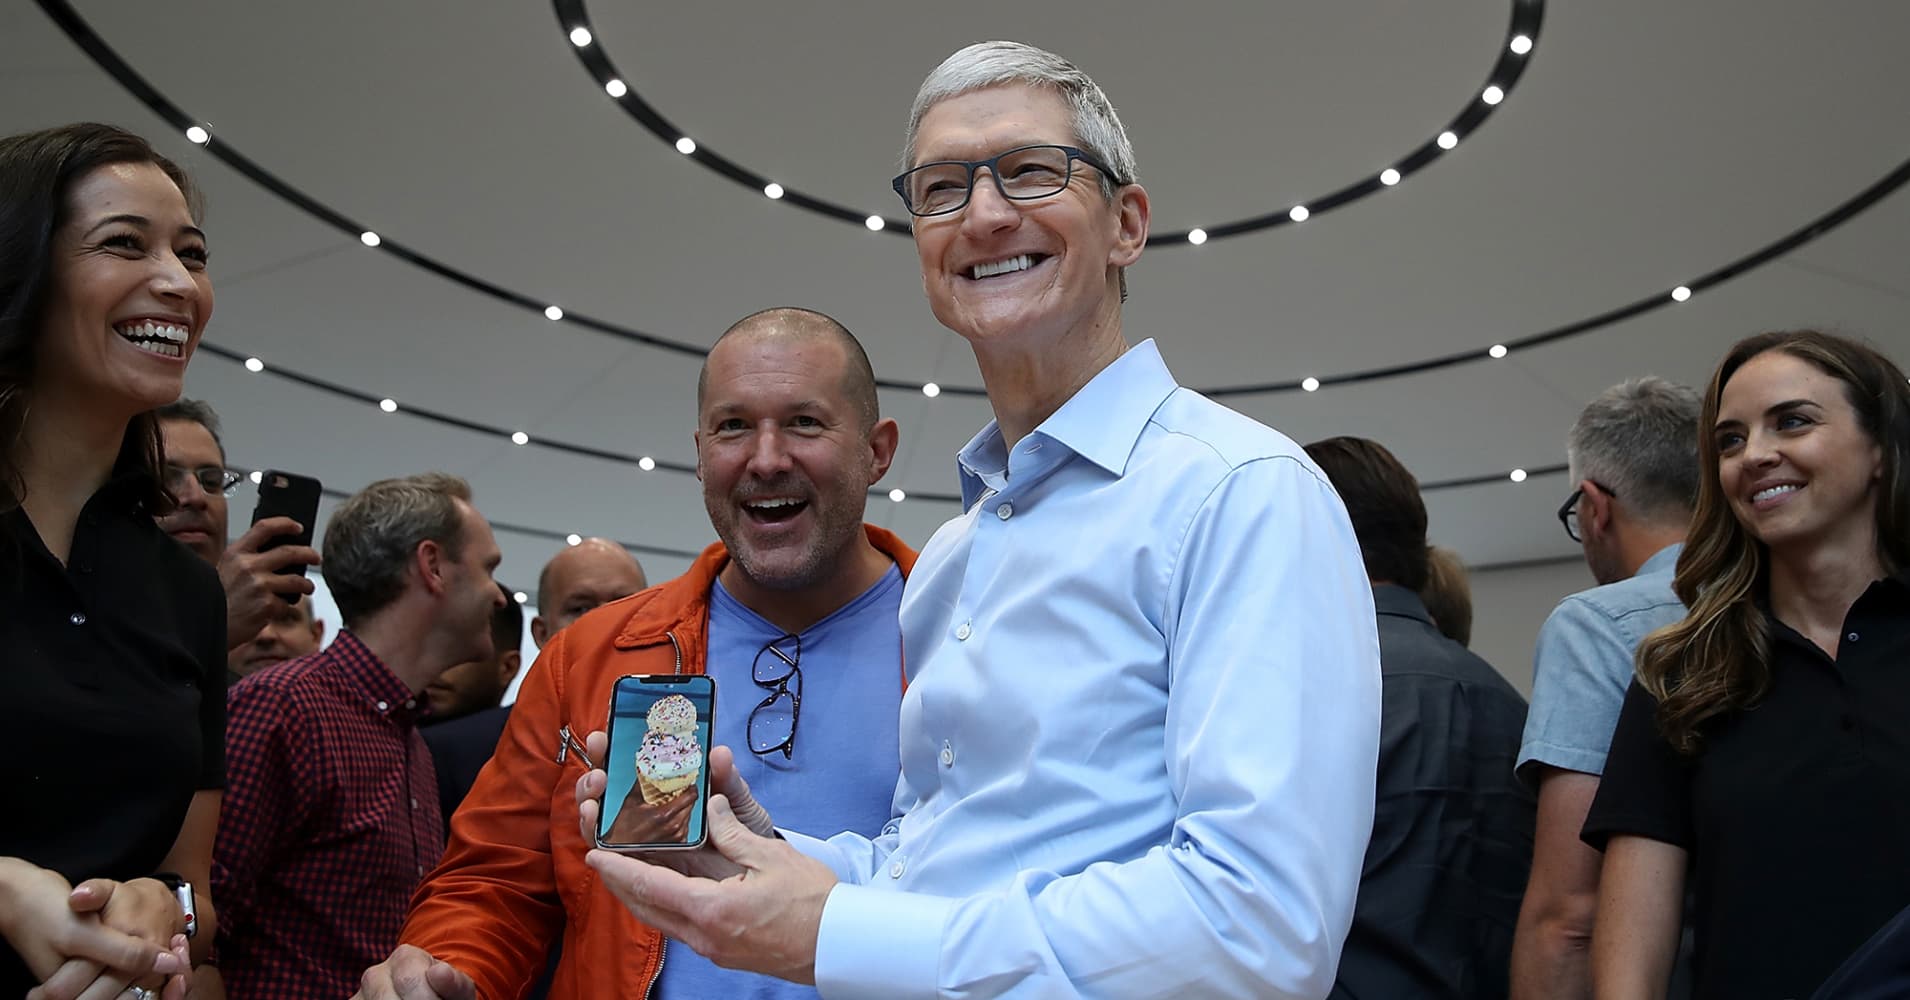 Apple CEO Tim Cook says iPhones won't see a tariff amid China trade tensions: 'I just don't see that'